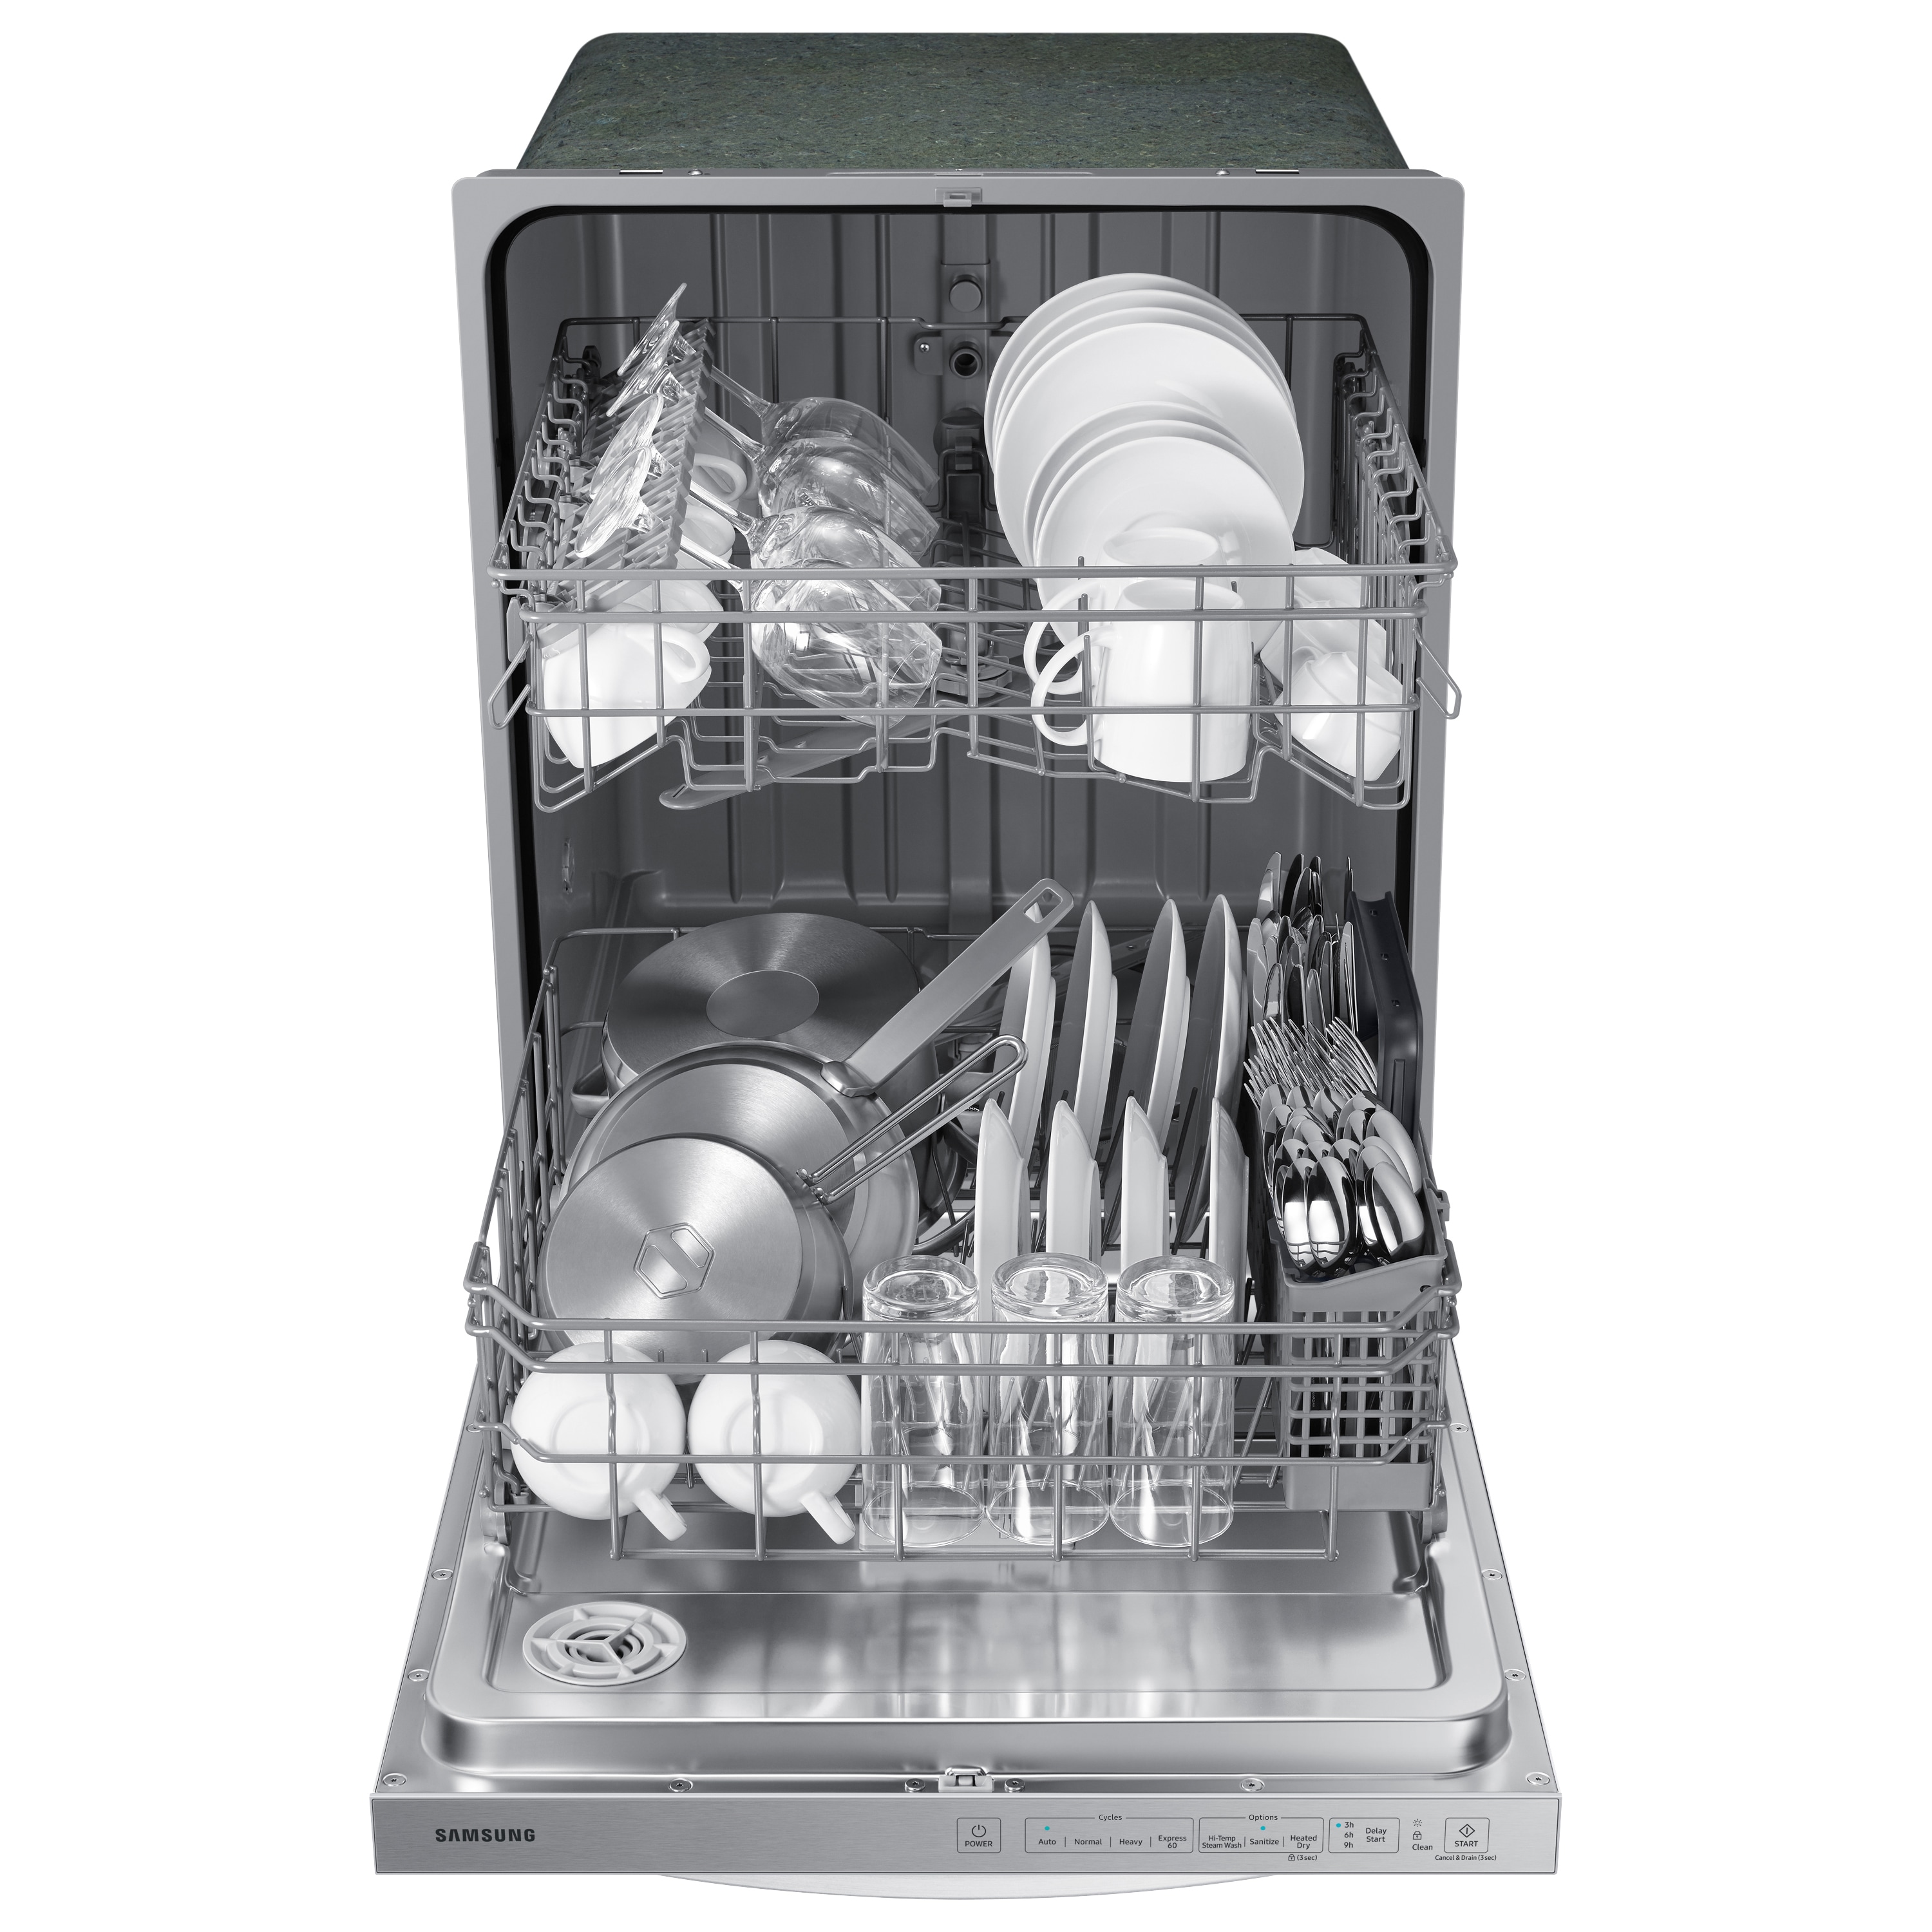 Samsung dishwasher cycles, options, and settings